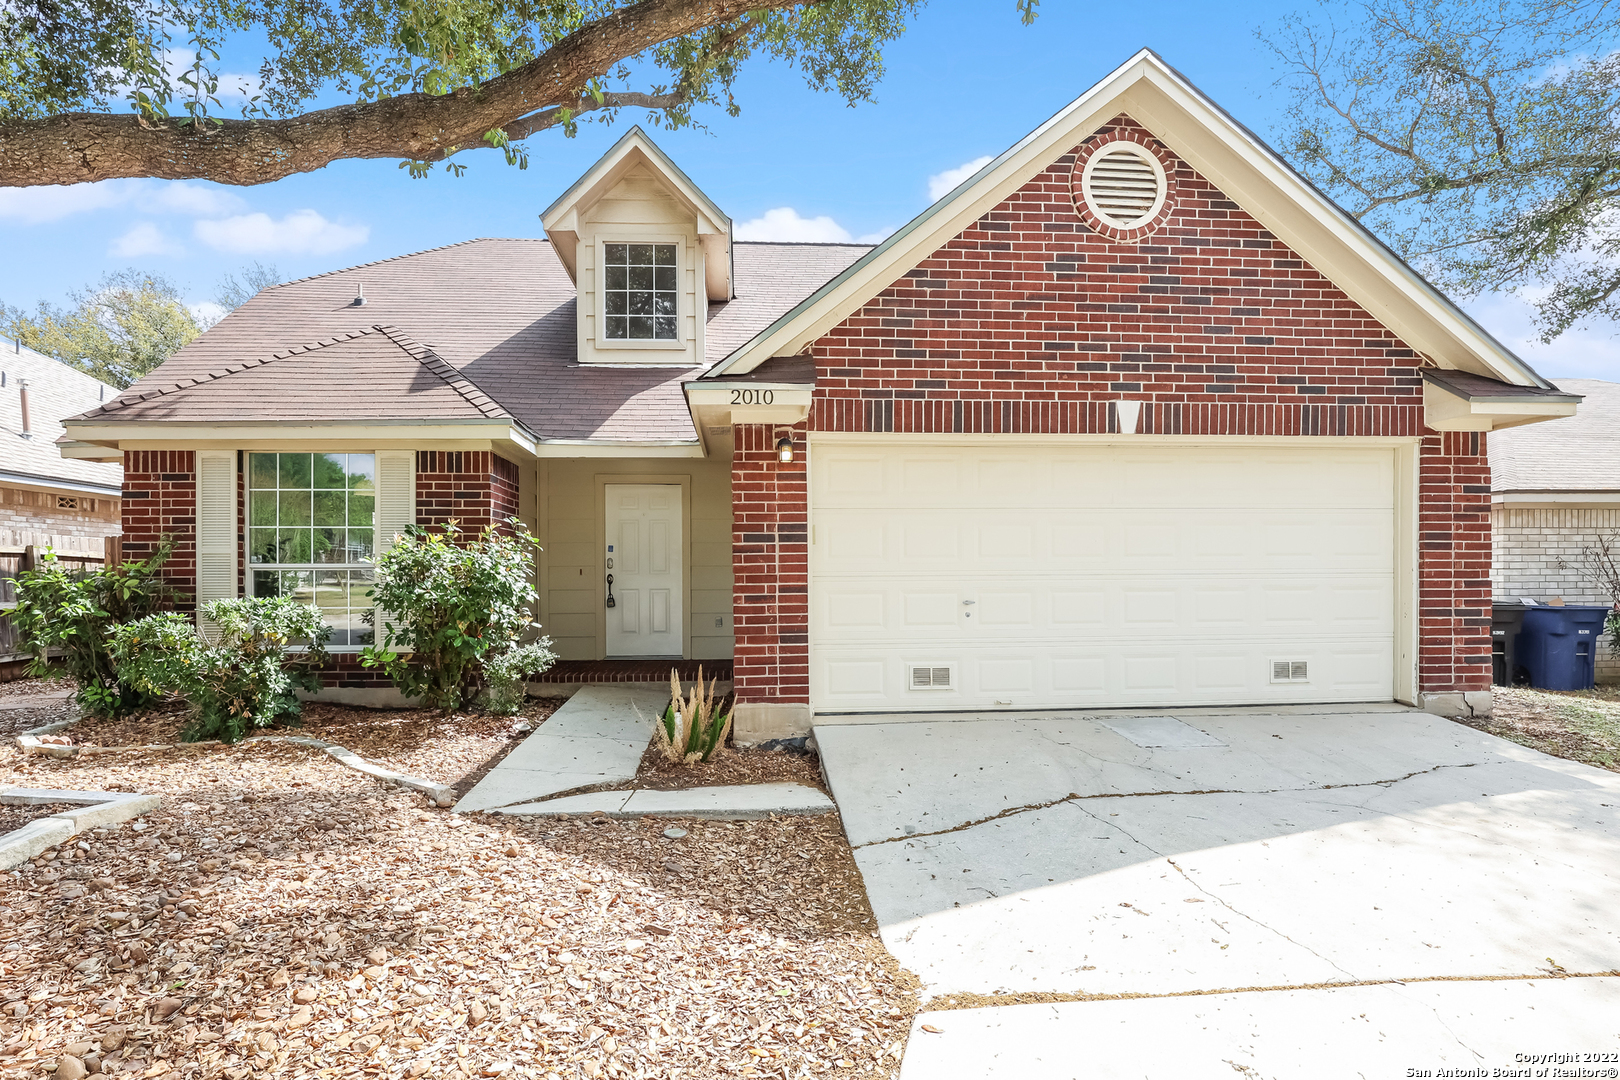 This San Antonio two-story home offers a two-car garage.